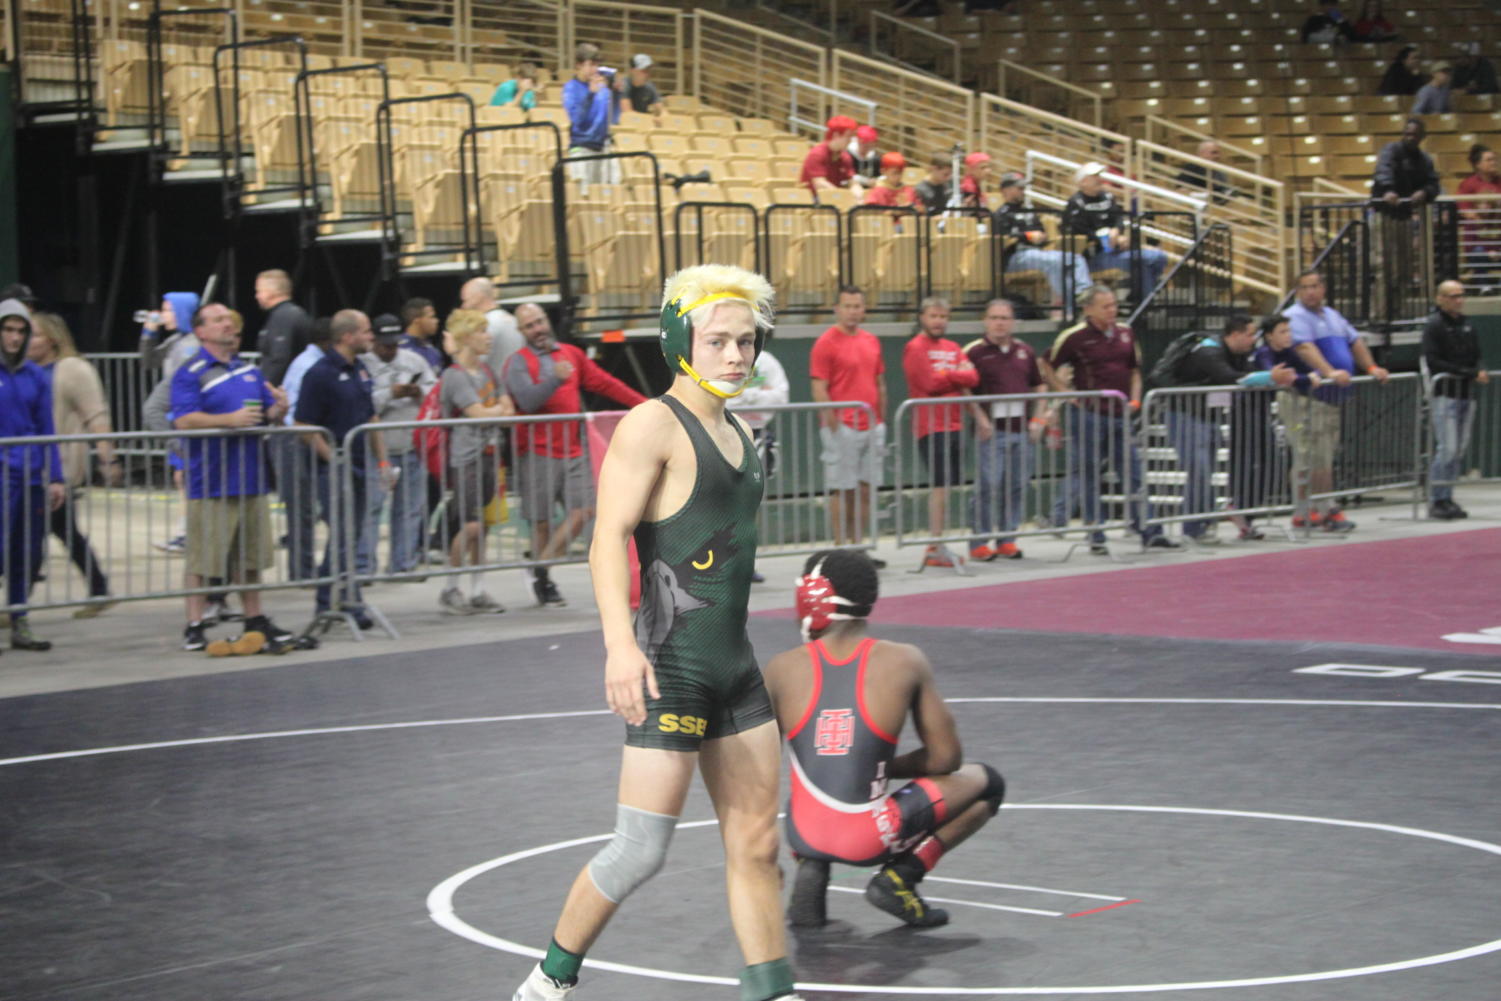 Falcon+wrestlers+compete+in+the+state+tournament%3B+Manning+places+4th+in+state